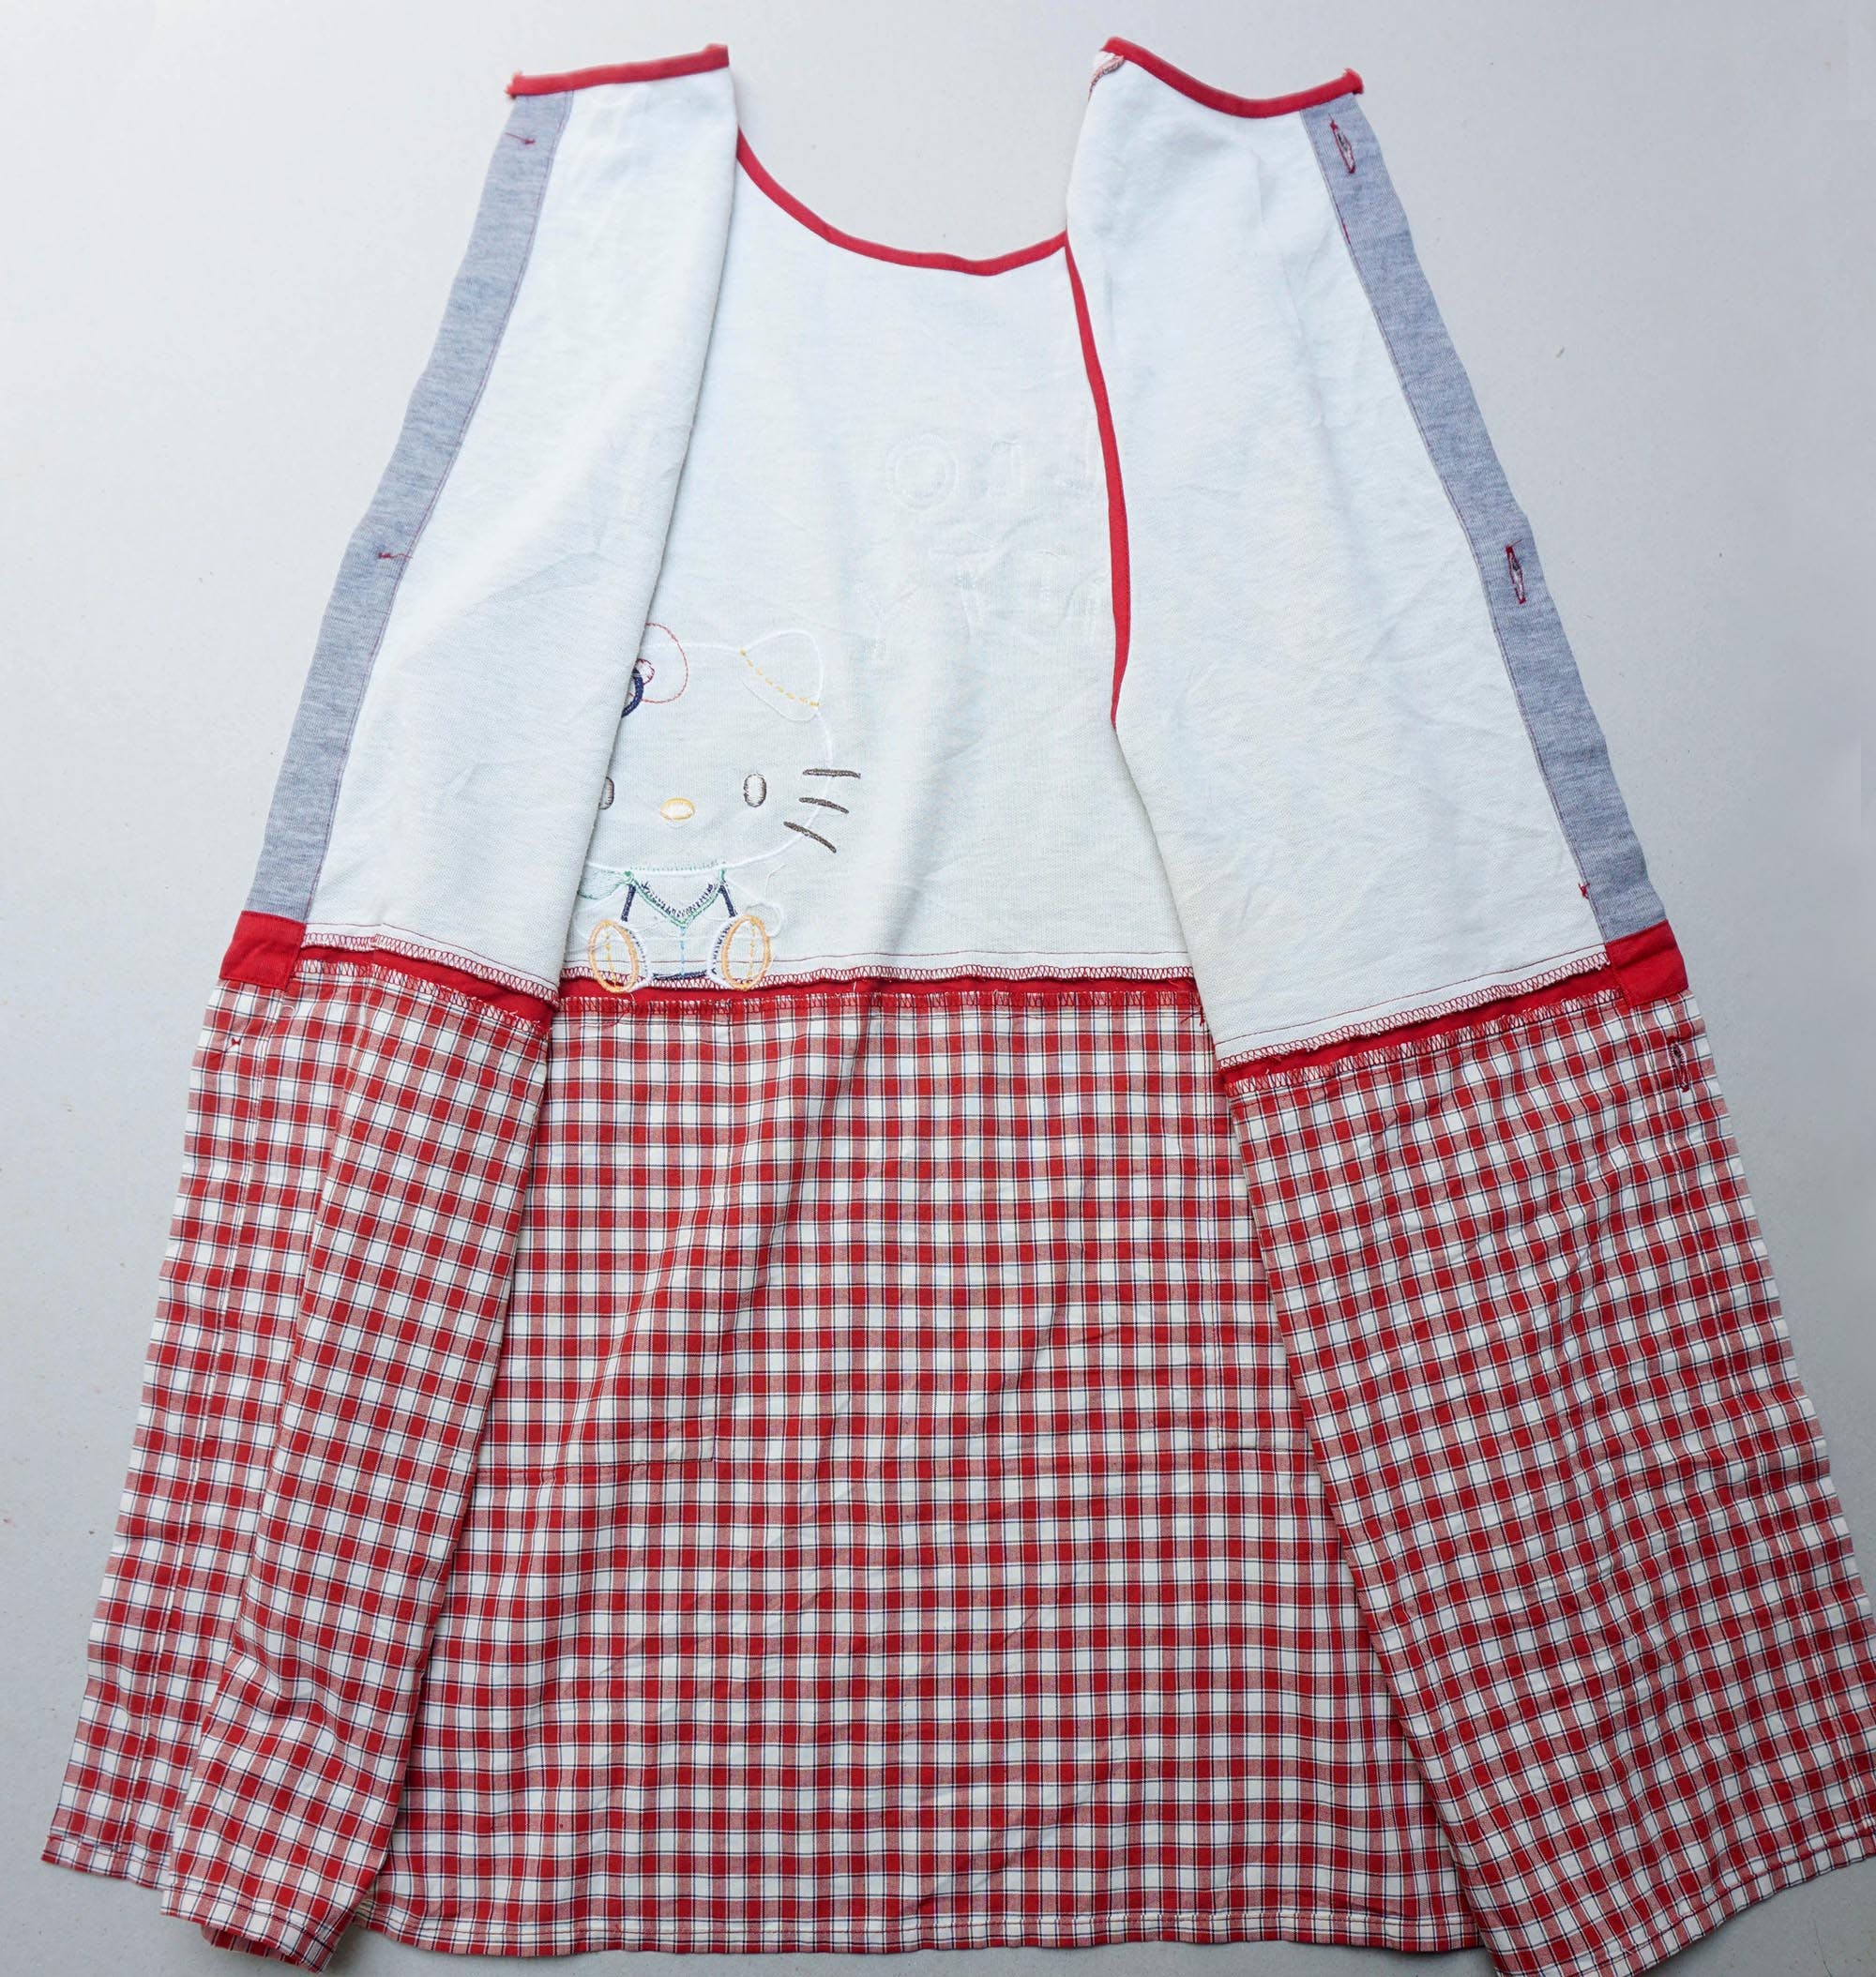 Japanese Brand - HELLO KITTY Patchwork & Checkered Apron - 10